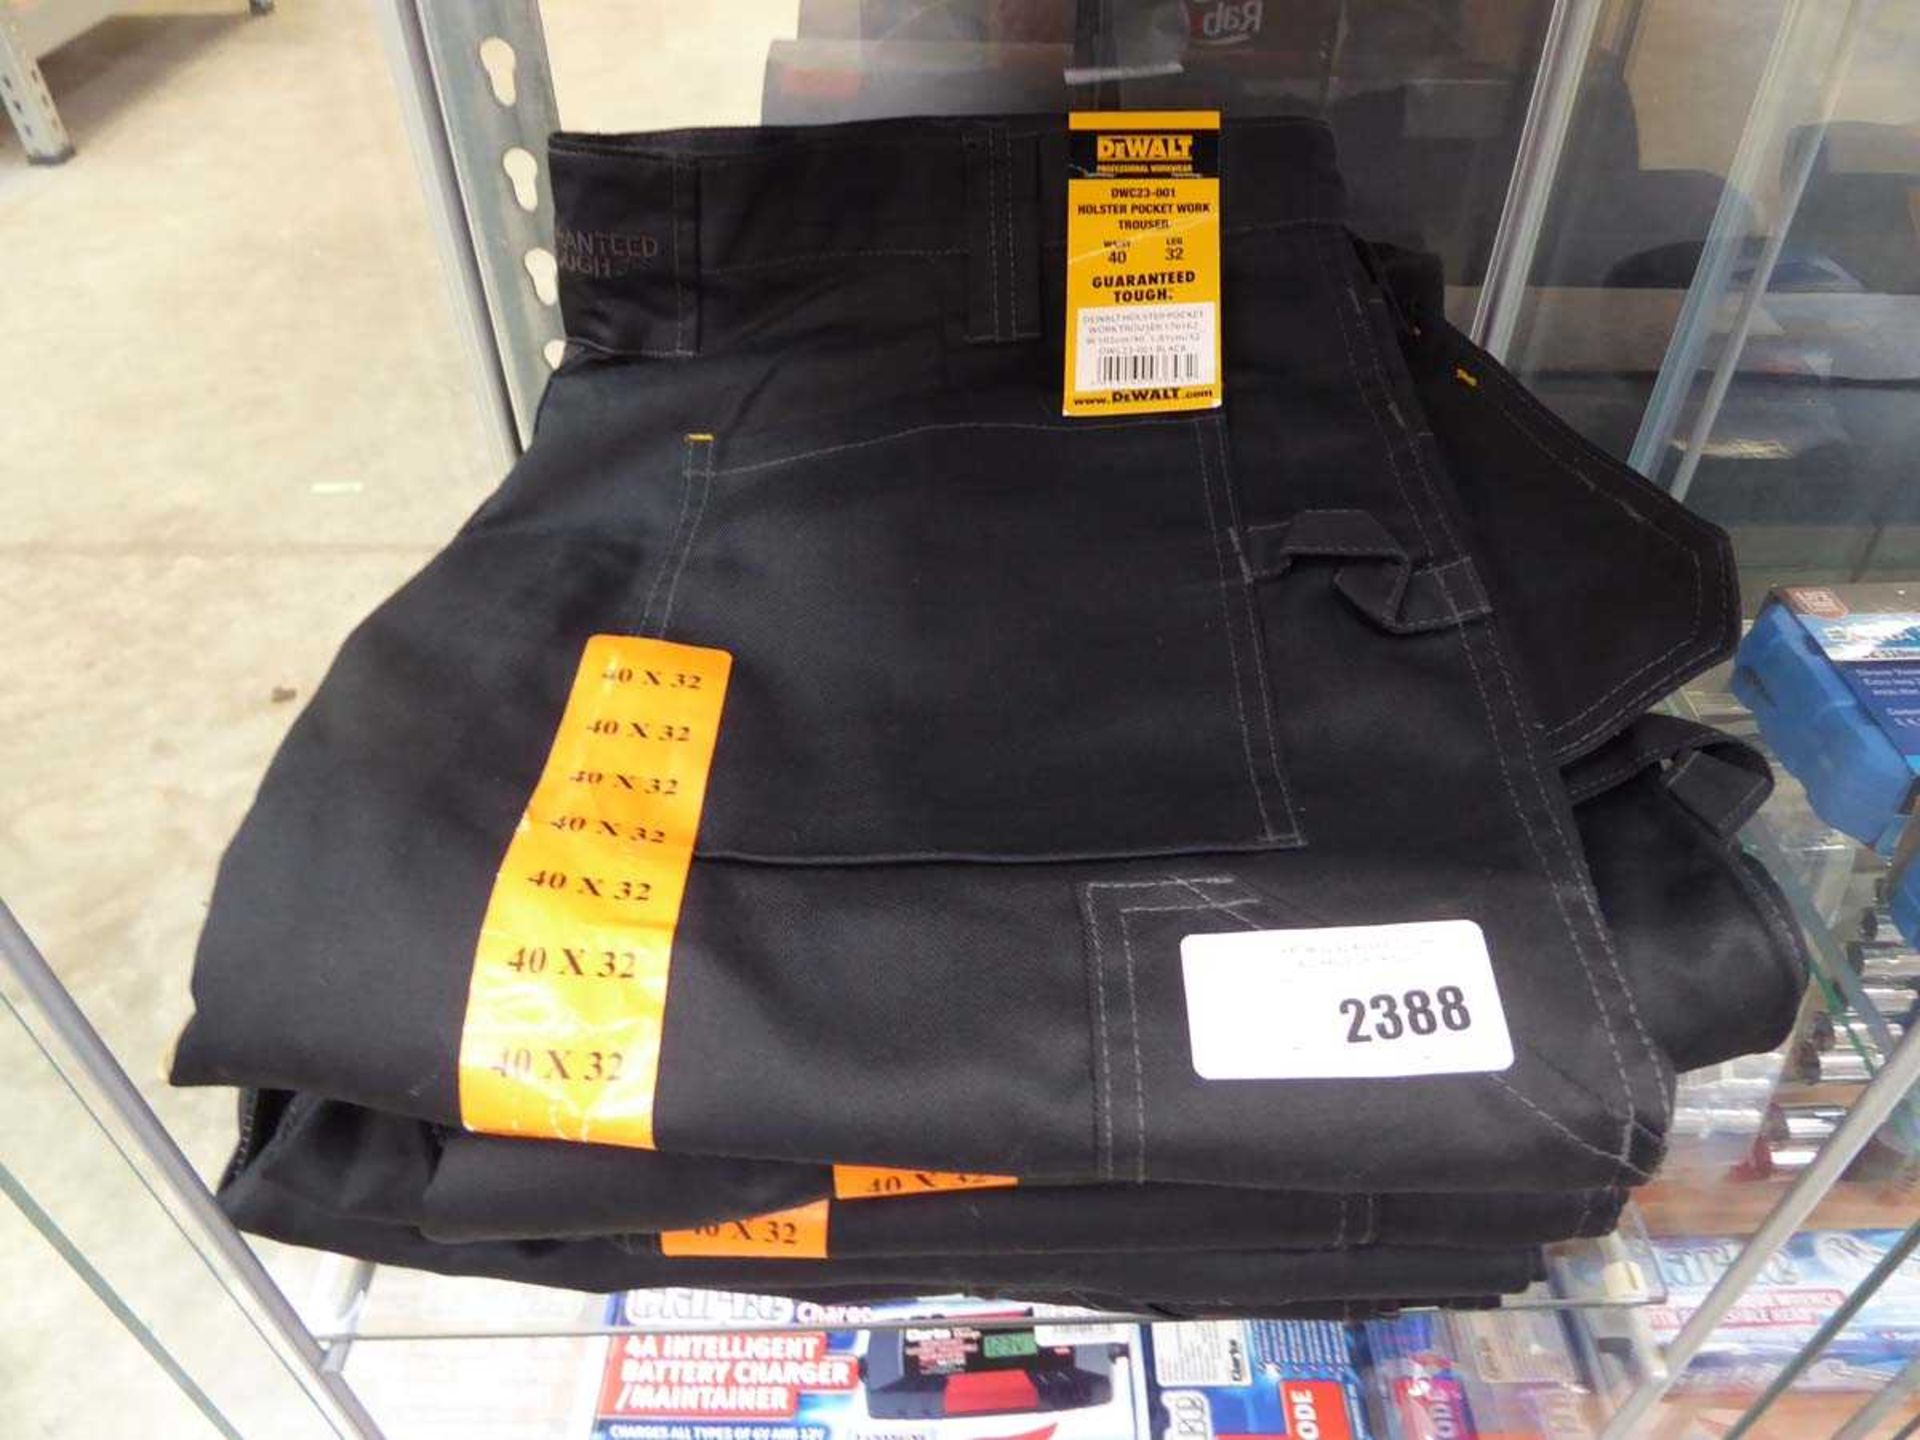 +VAT 5 pairs of Dewalt Holster pocket work trousers in black, all size 40 x 32